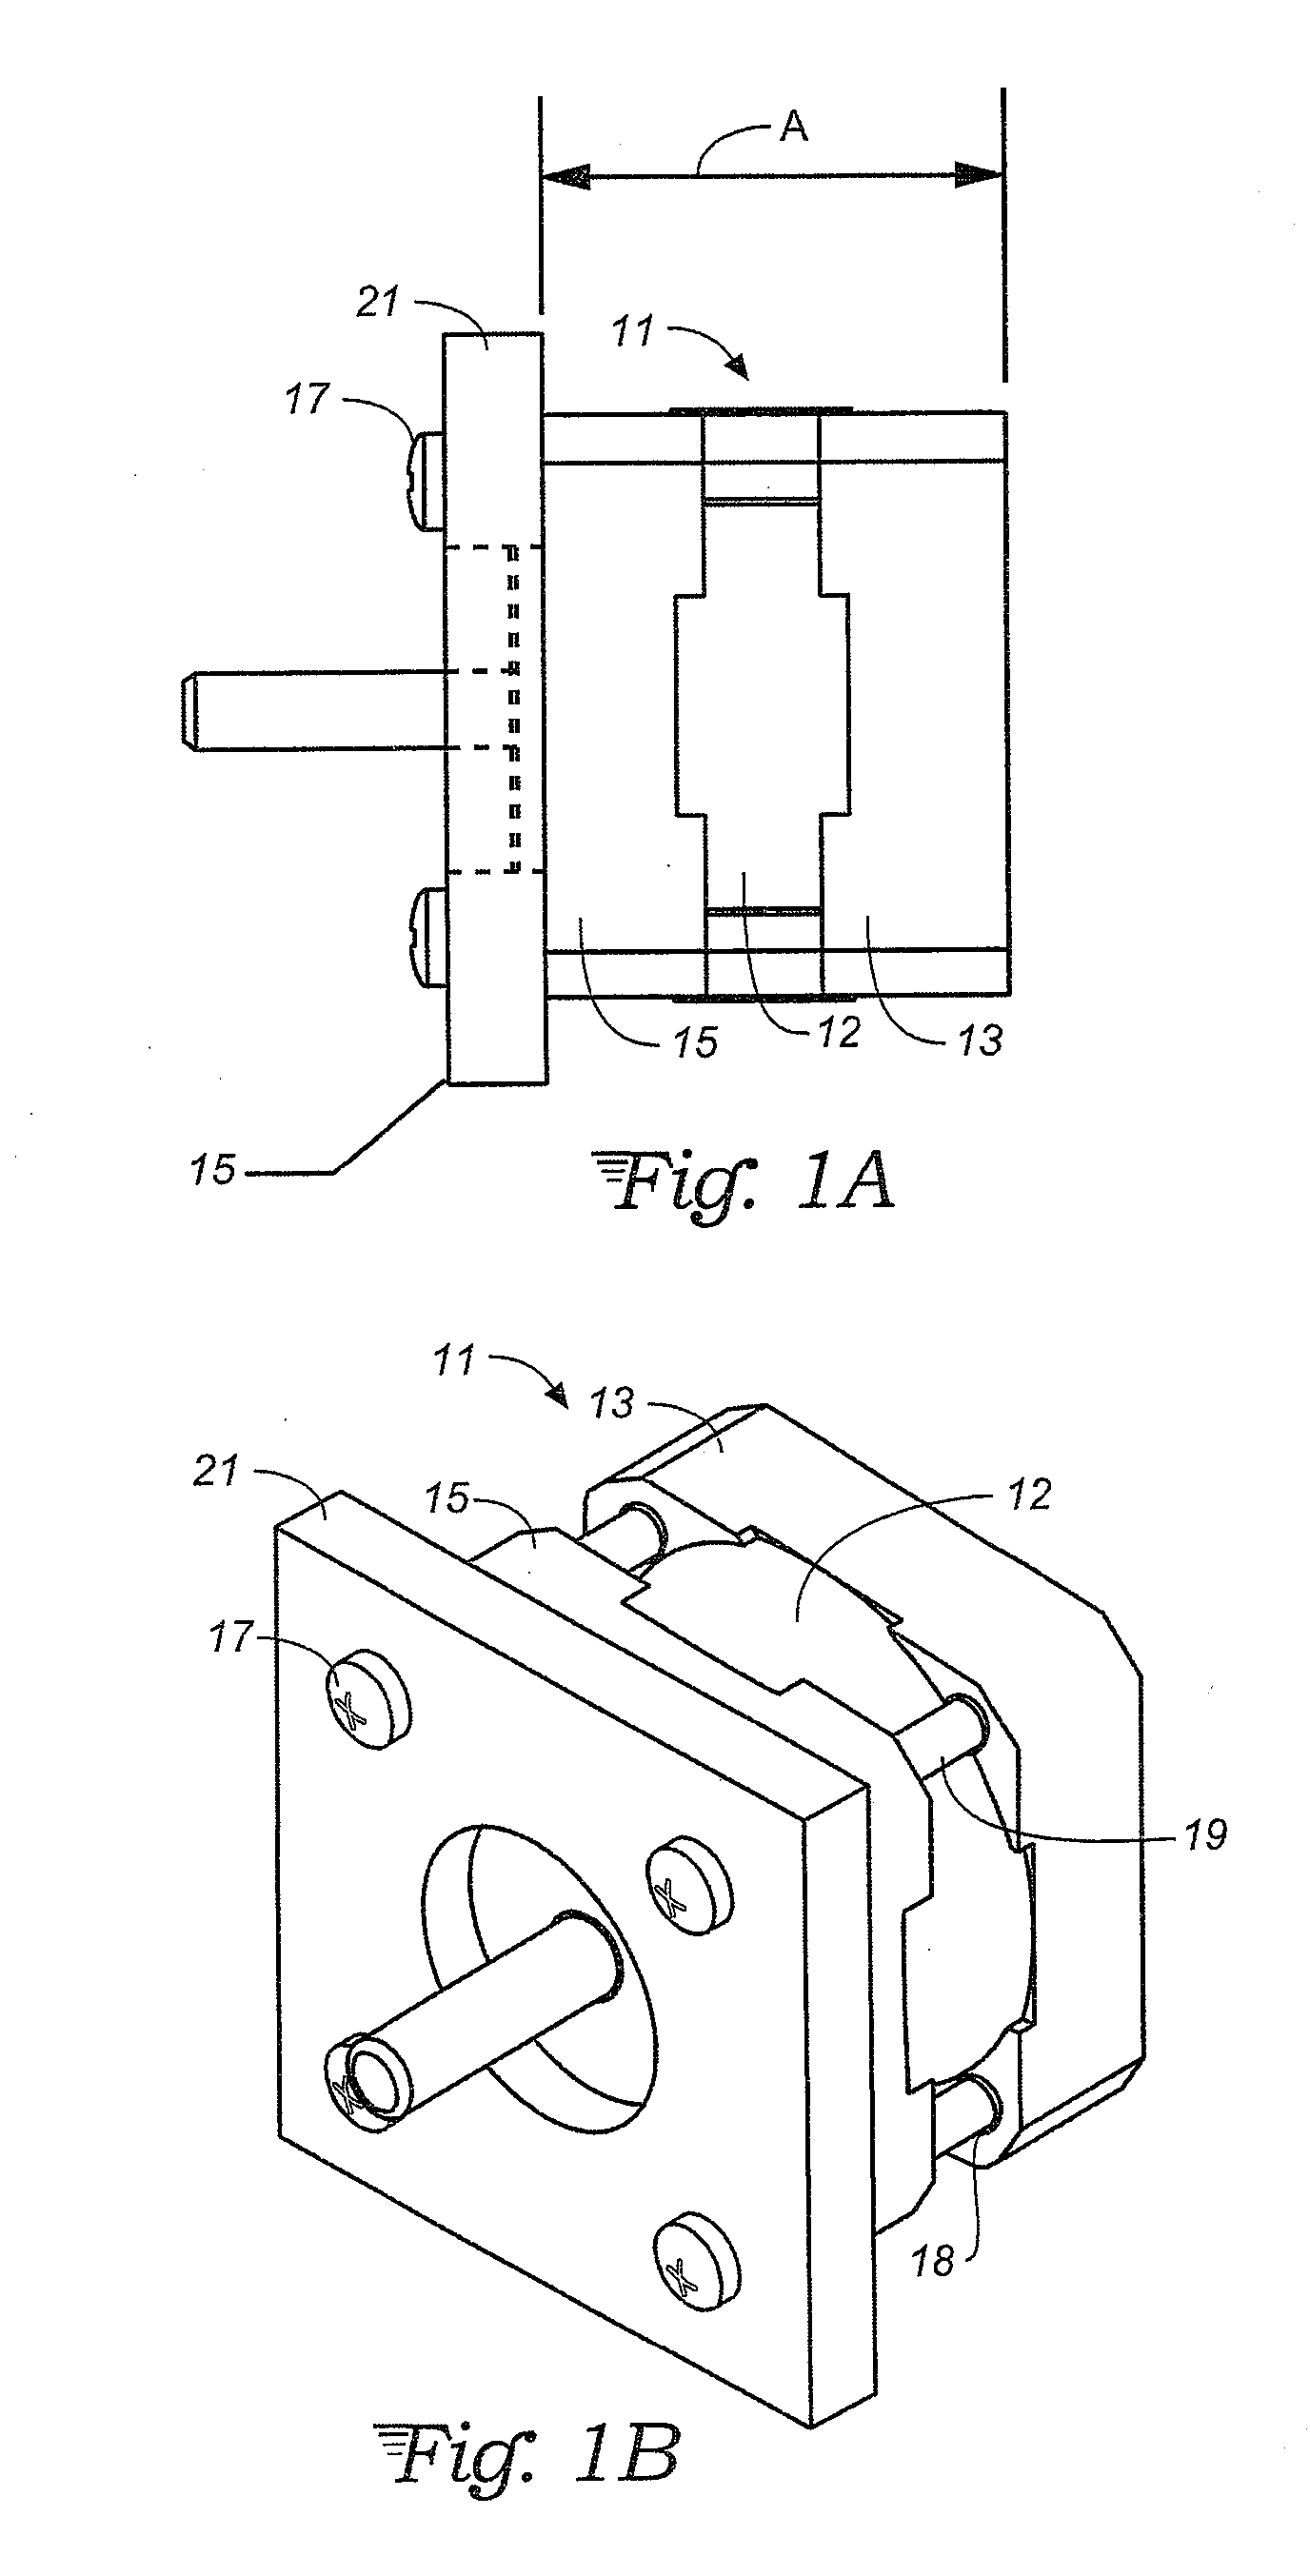 Motor having stator assembly with integrated mounting and heat sink features